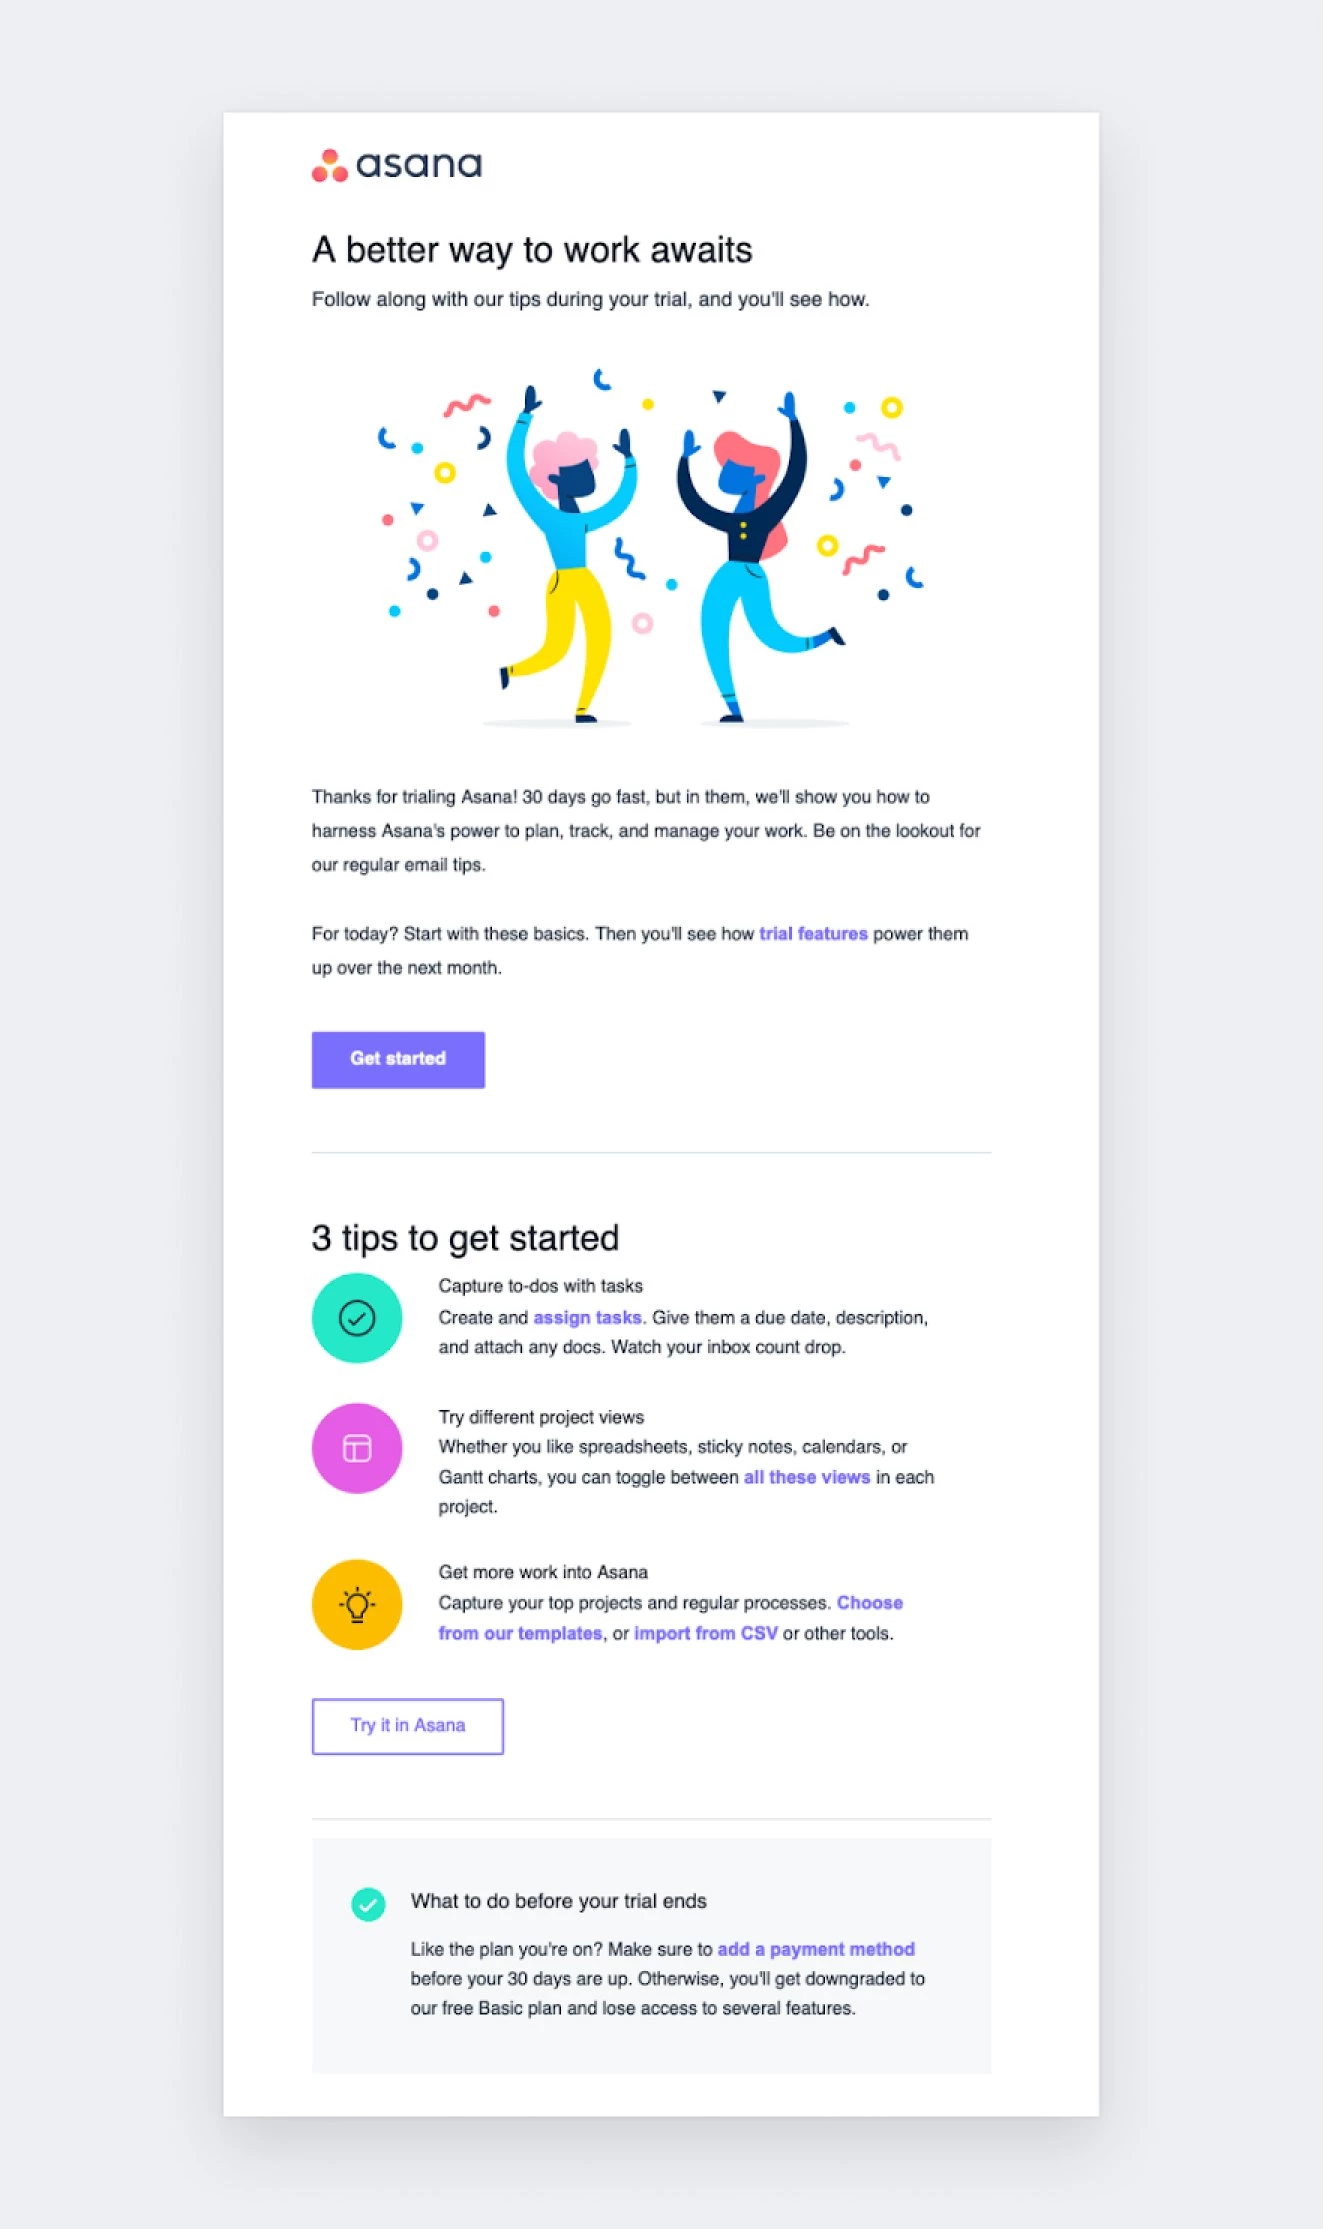 Welcome email example - Asana 3 tips to get started